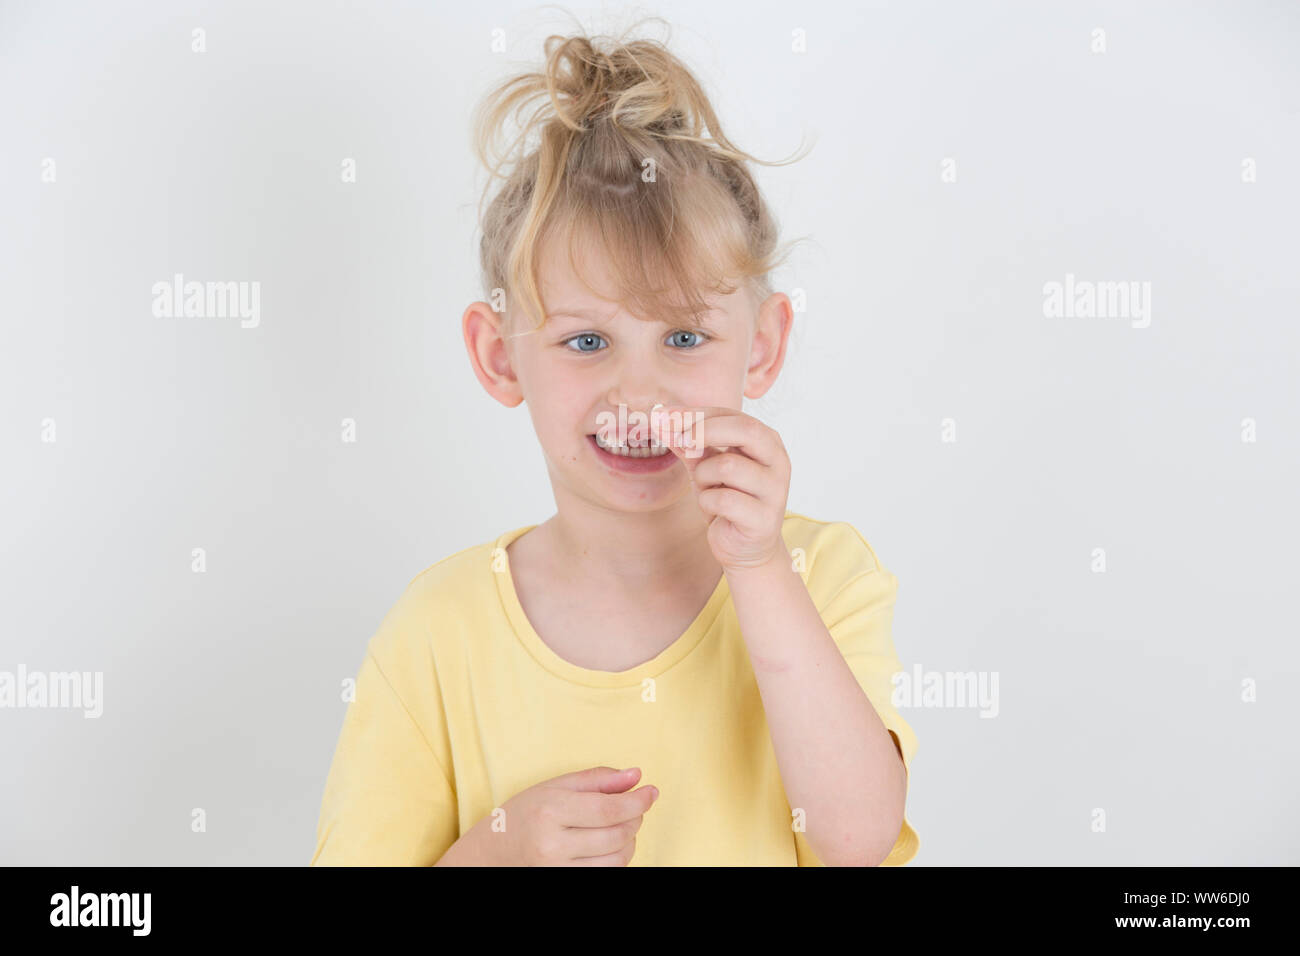 Girl with tooth in her hand, portrait Stock Photo